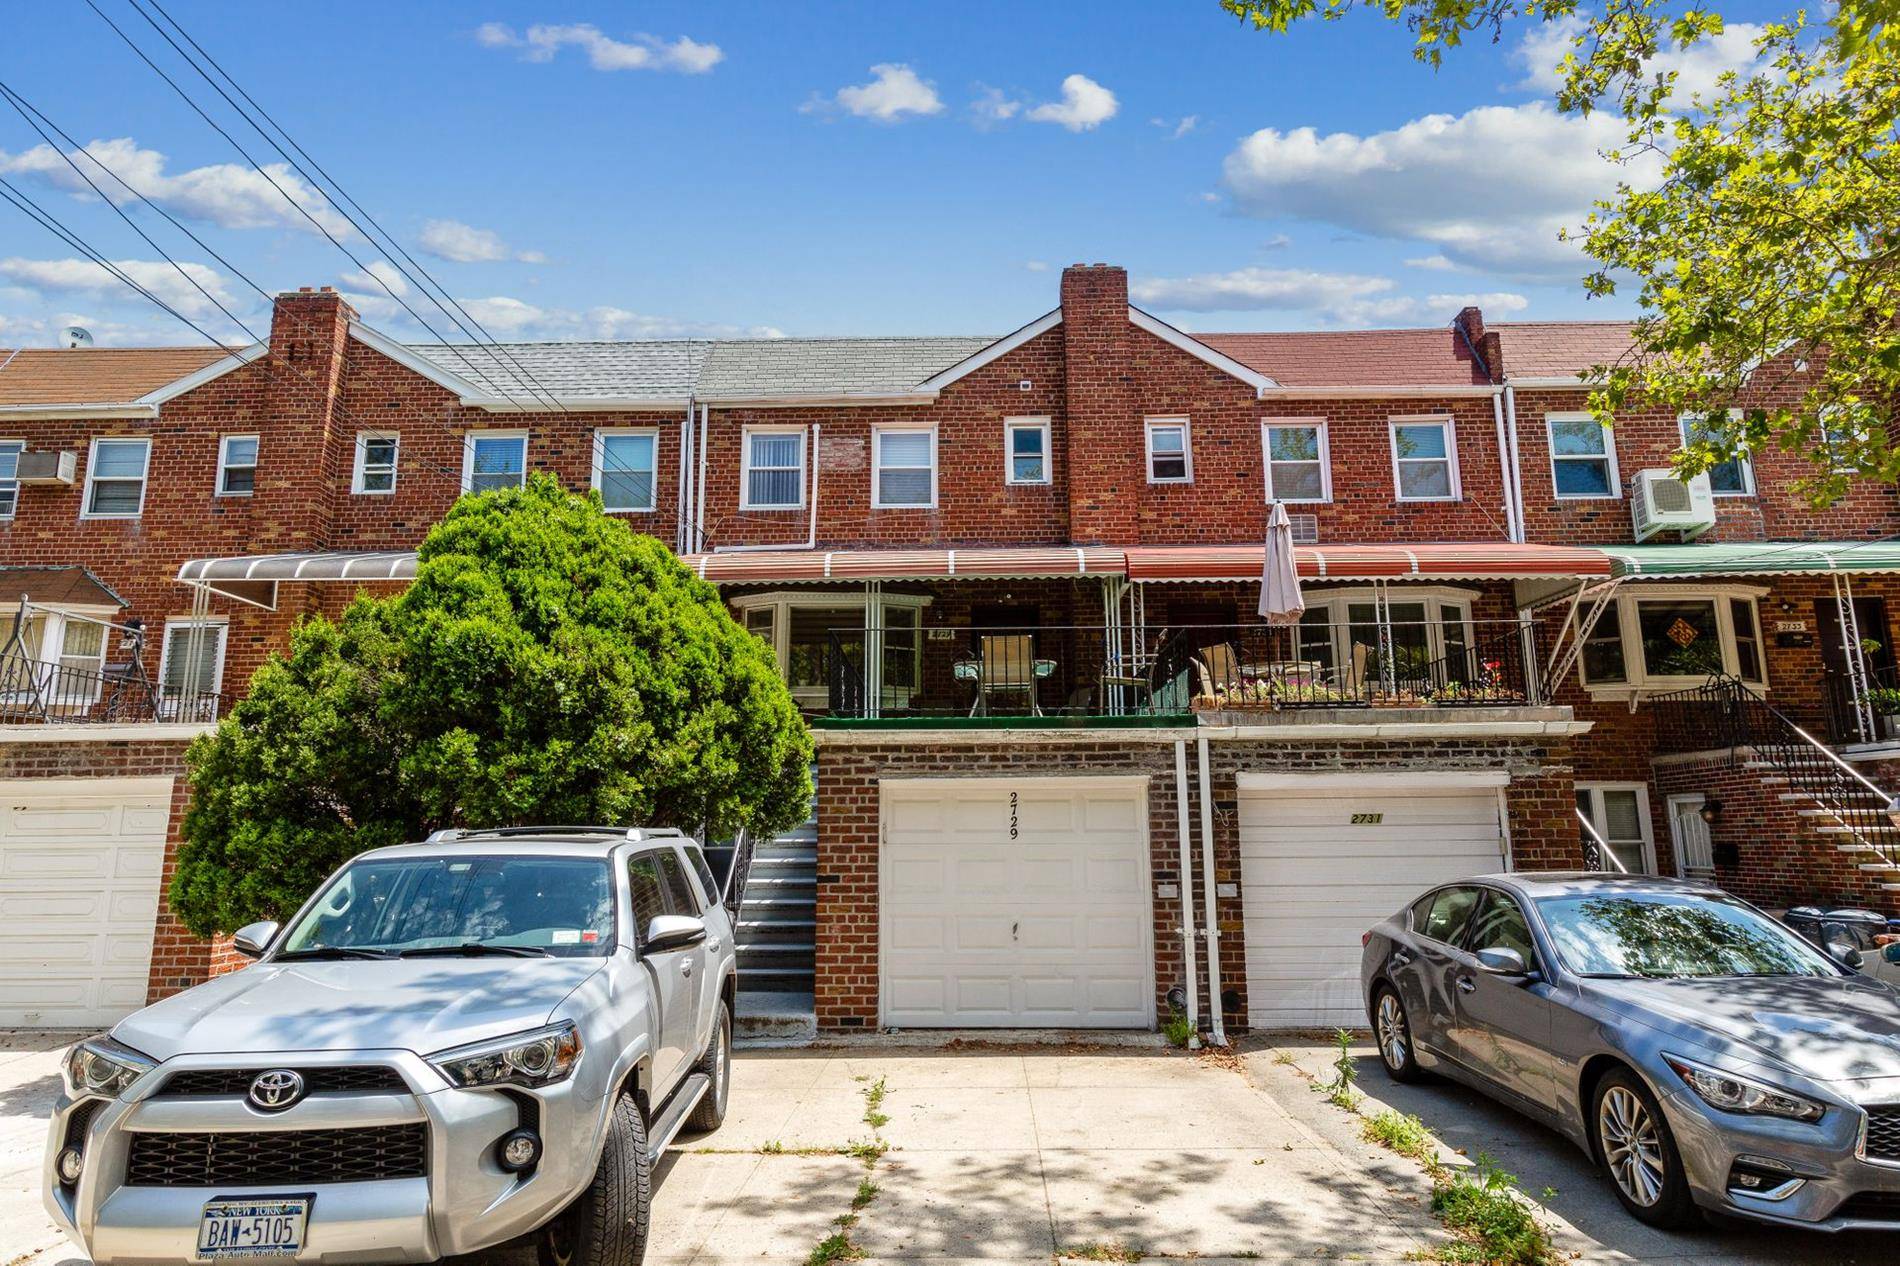 In the heart of Sheepshead Bay, we present this beautiful two family brick home with a private drive and attached garage.